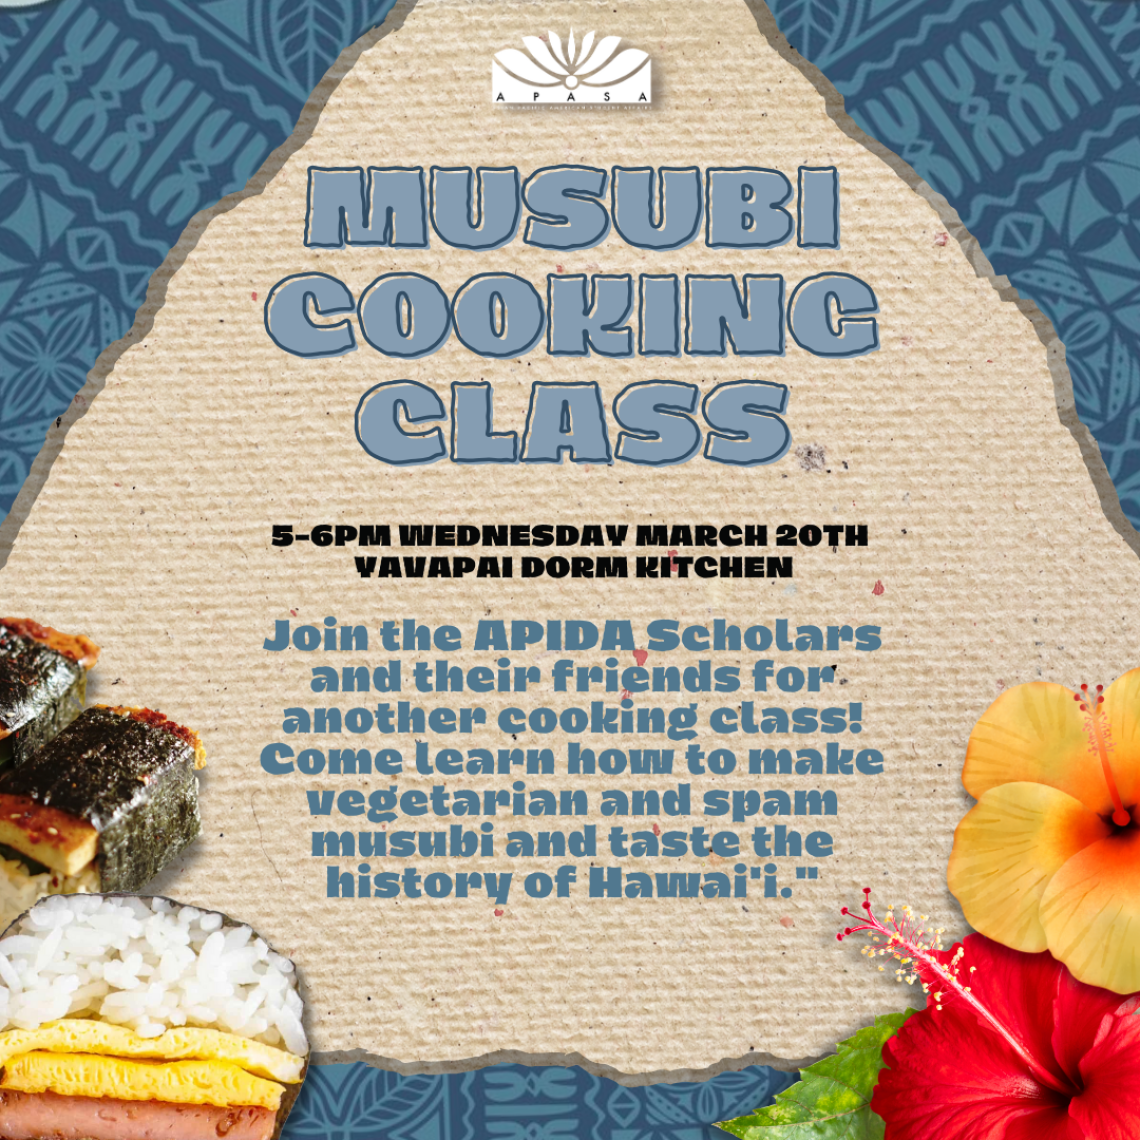 Flyer for APIDA Scholars Musubi Cooking Class with musubi photo, hibiscus flowers and Polynesian design in background. 